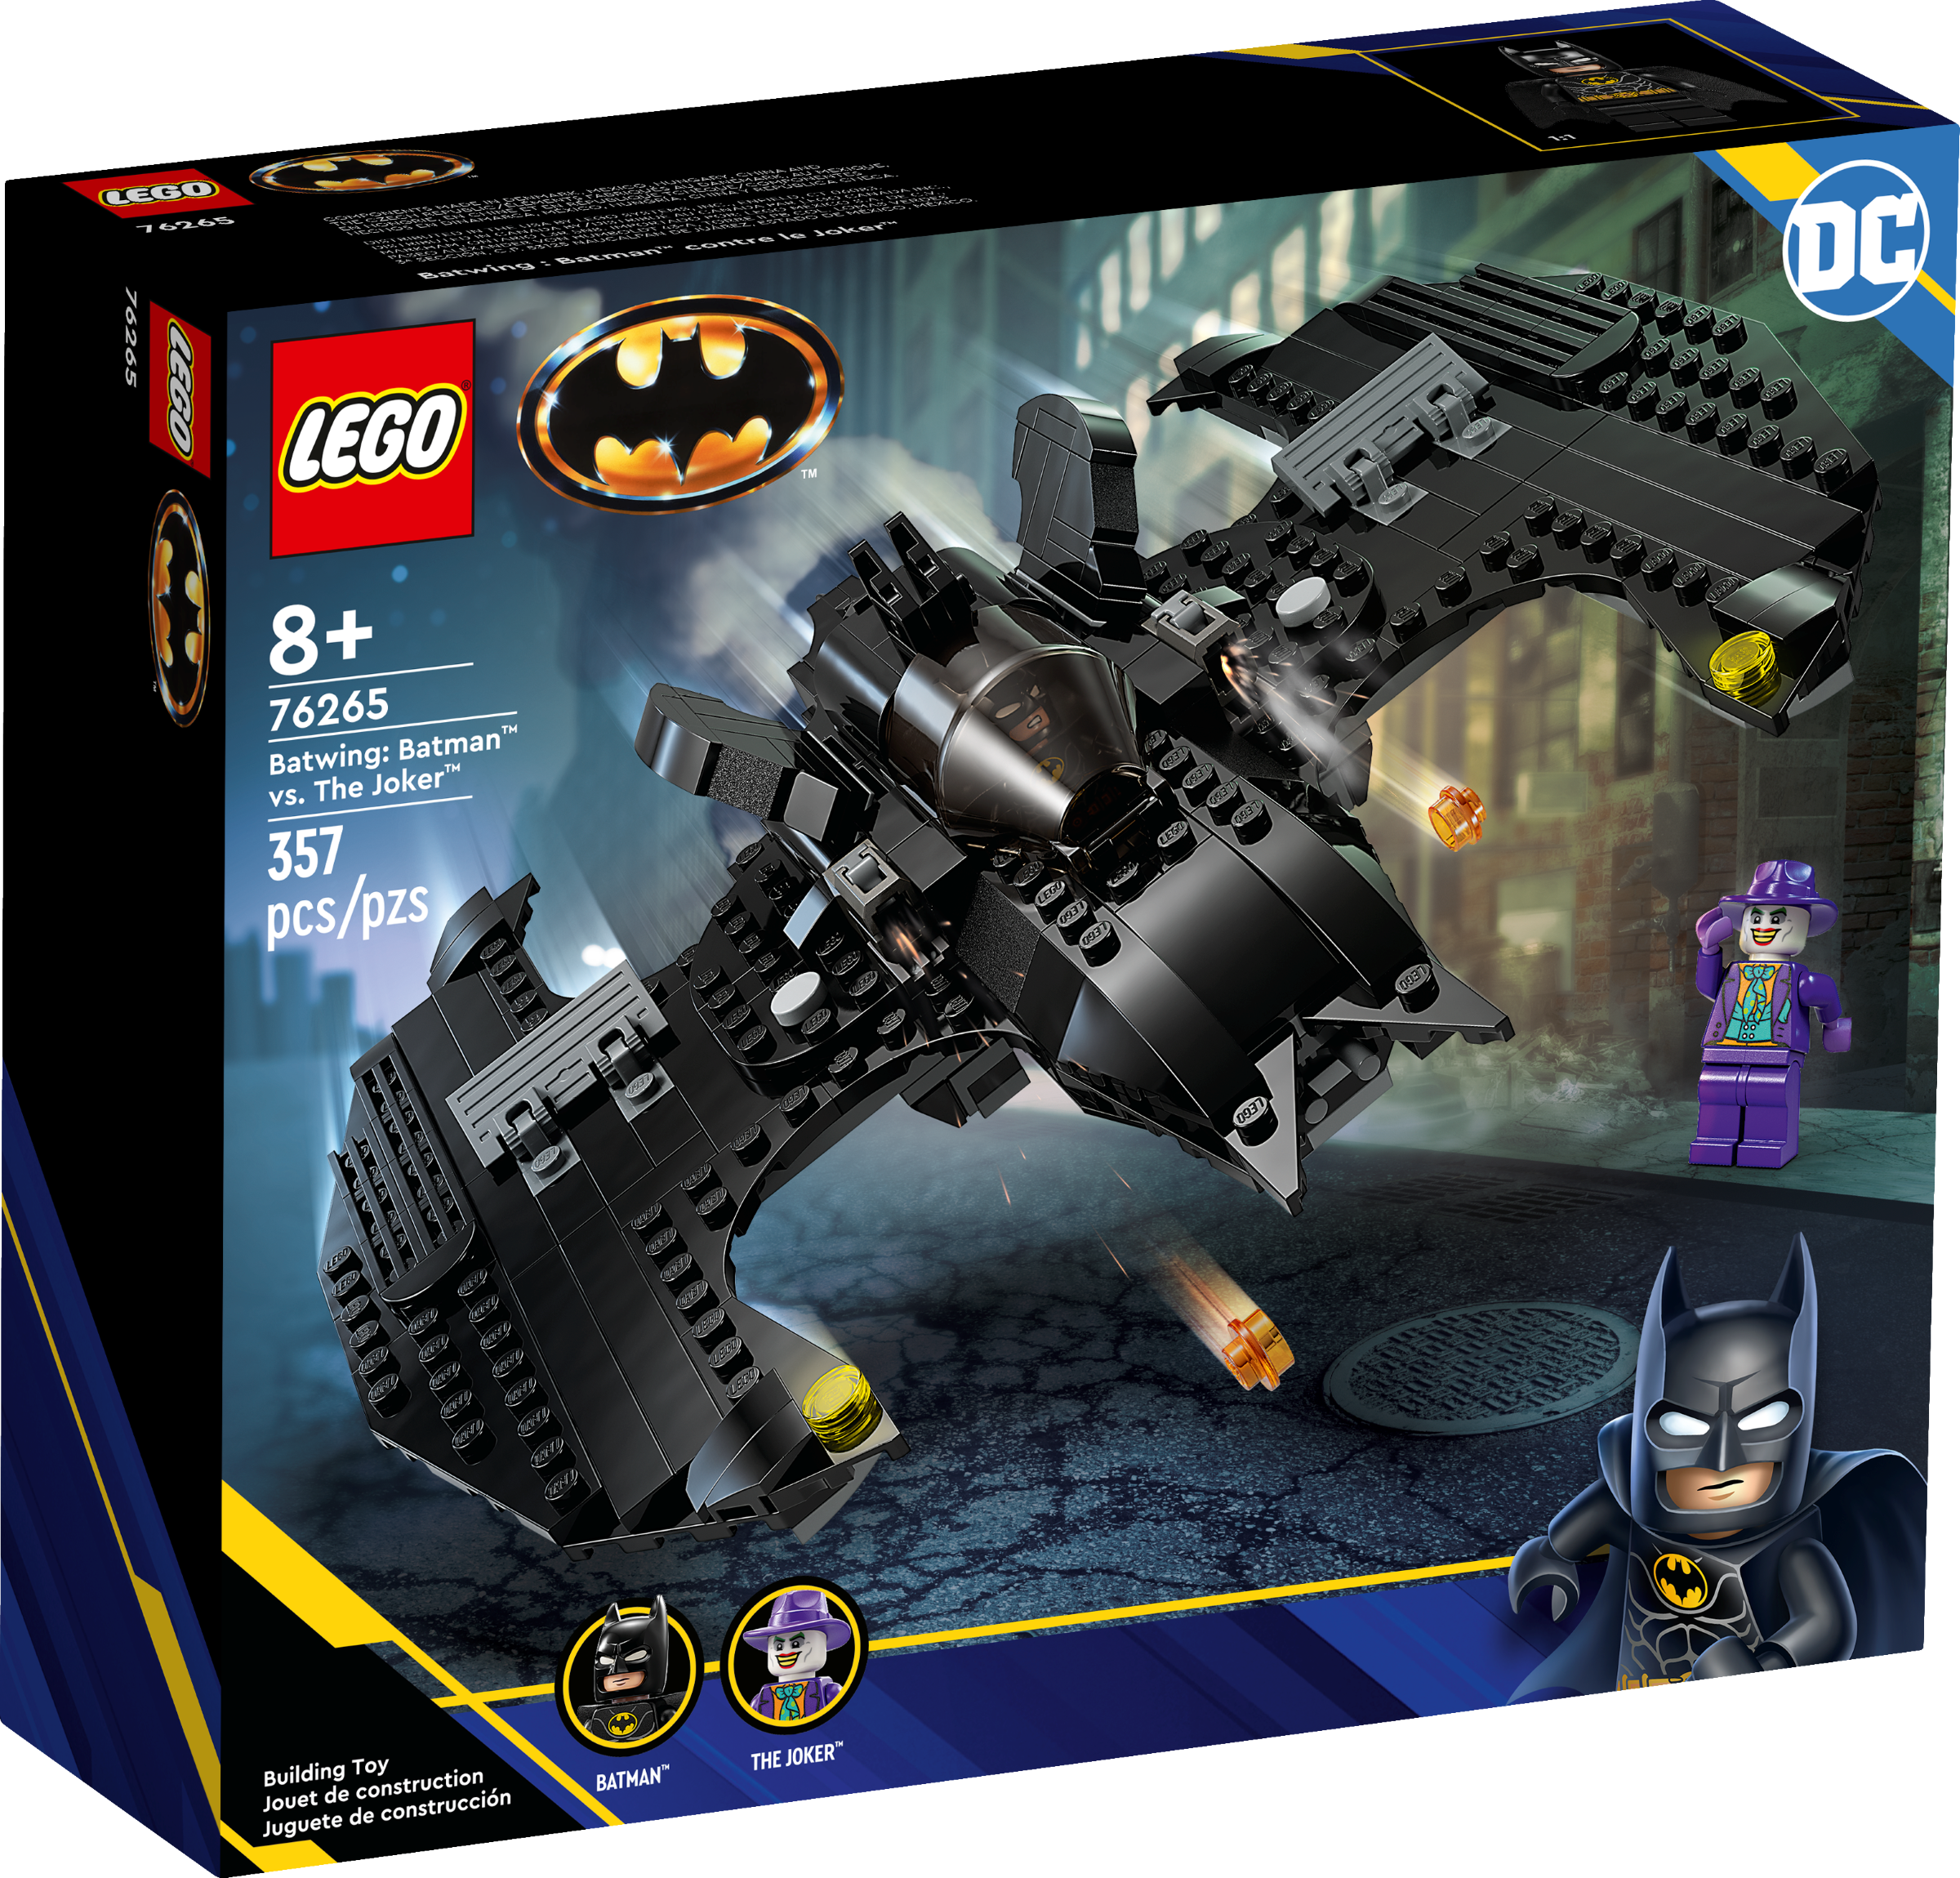 Building Kit Lego Batman - The Penguin Chase, Posters, gifts, merchandise